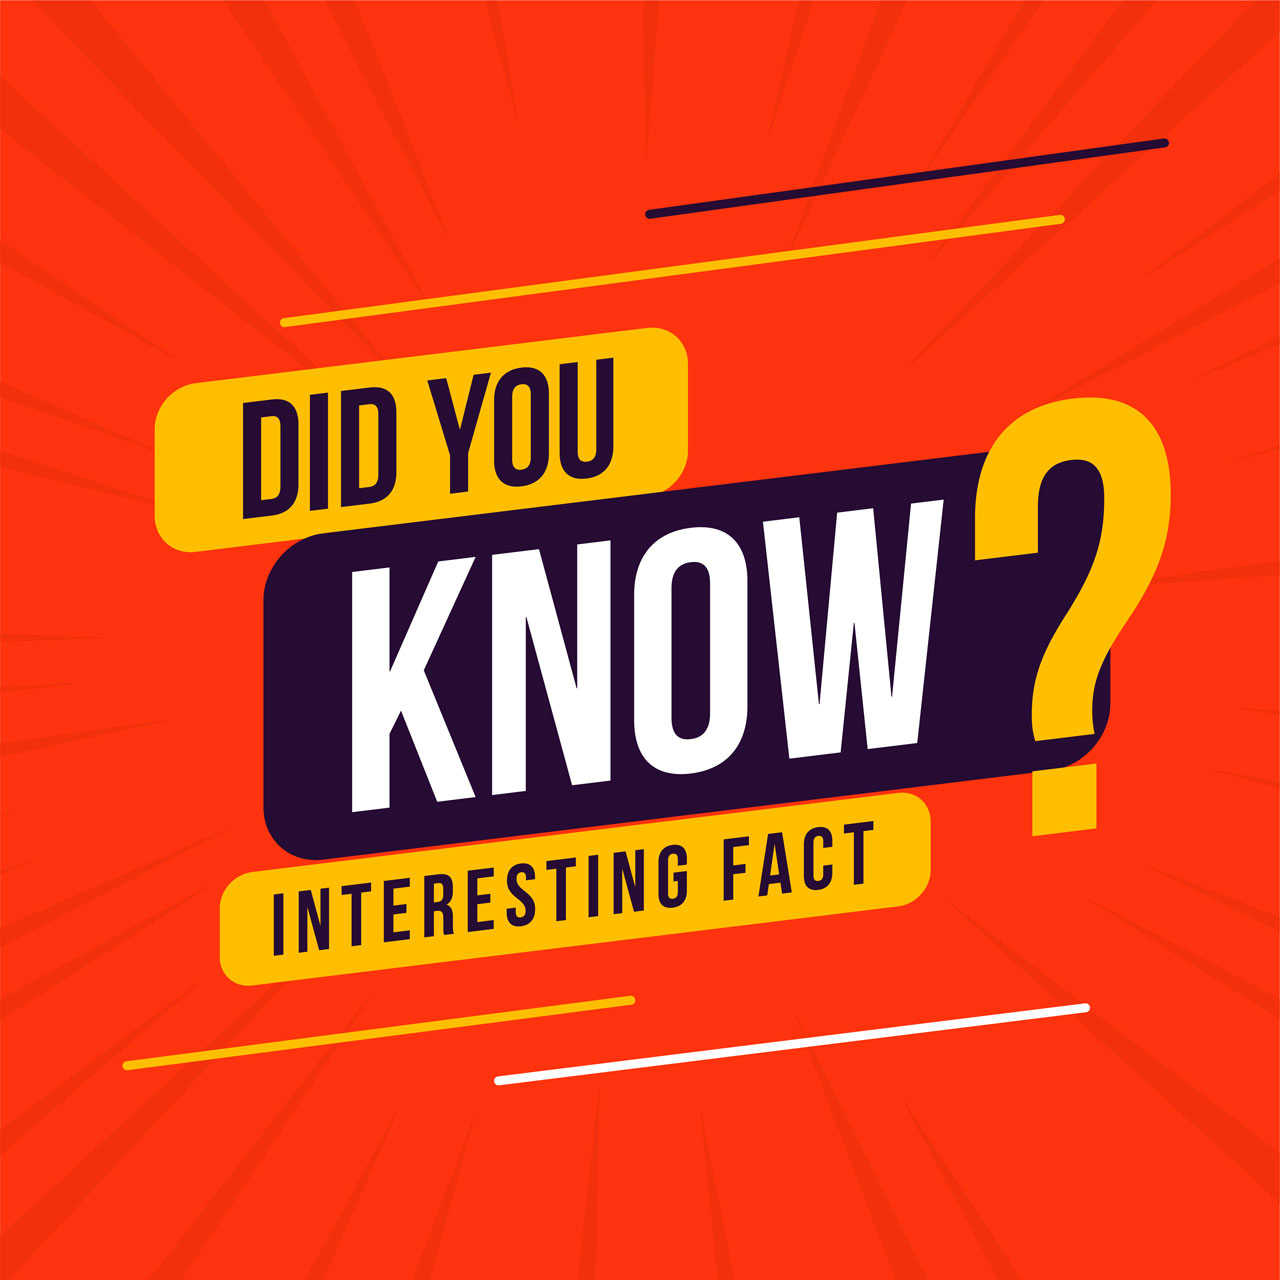 Interesting fact did you know design cartoon image